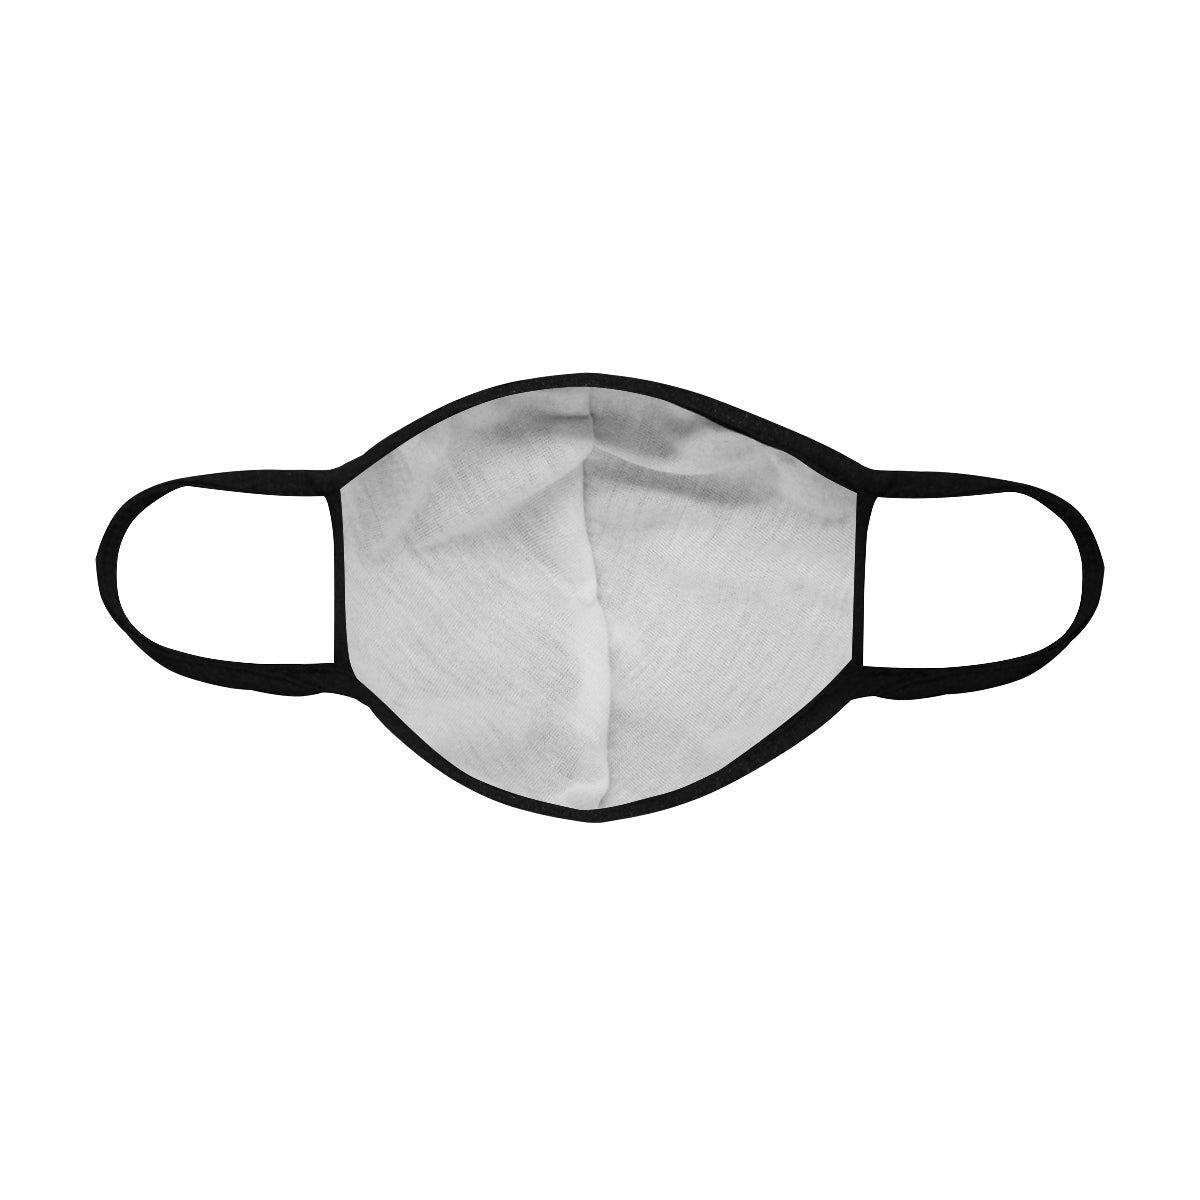 AfriBix Sky Blue Galaxy Cotton Fabric Face Mask with filter slot (30 Filters Included) - Non-medical use